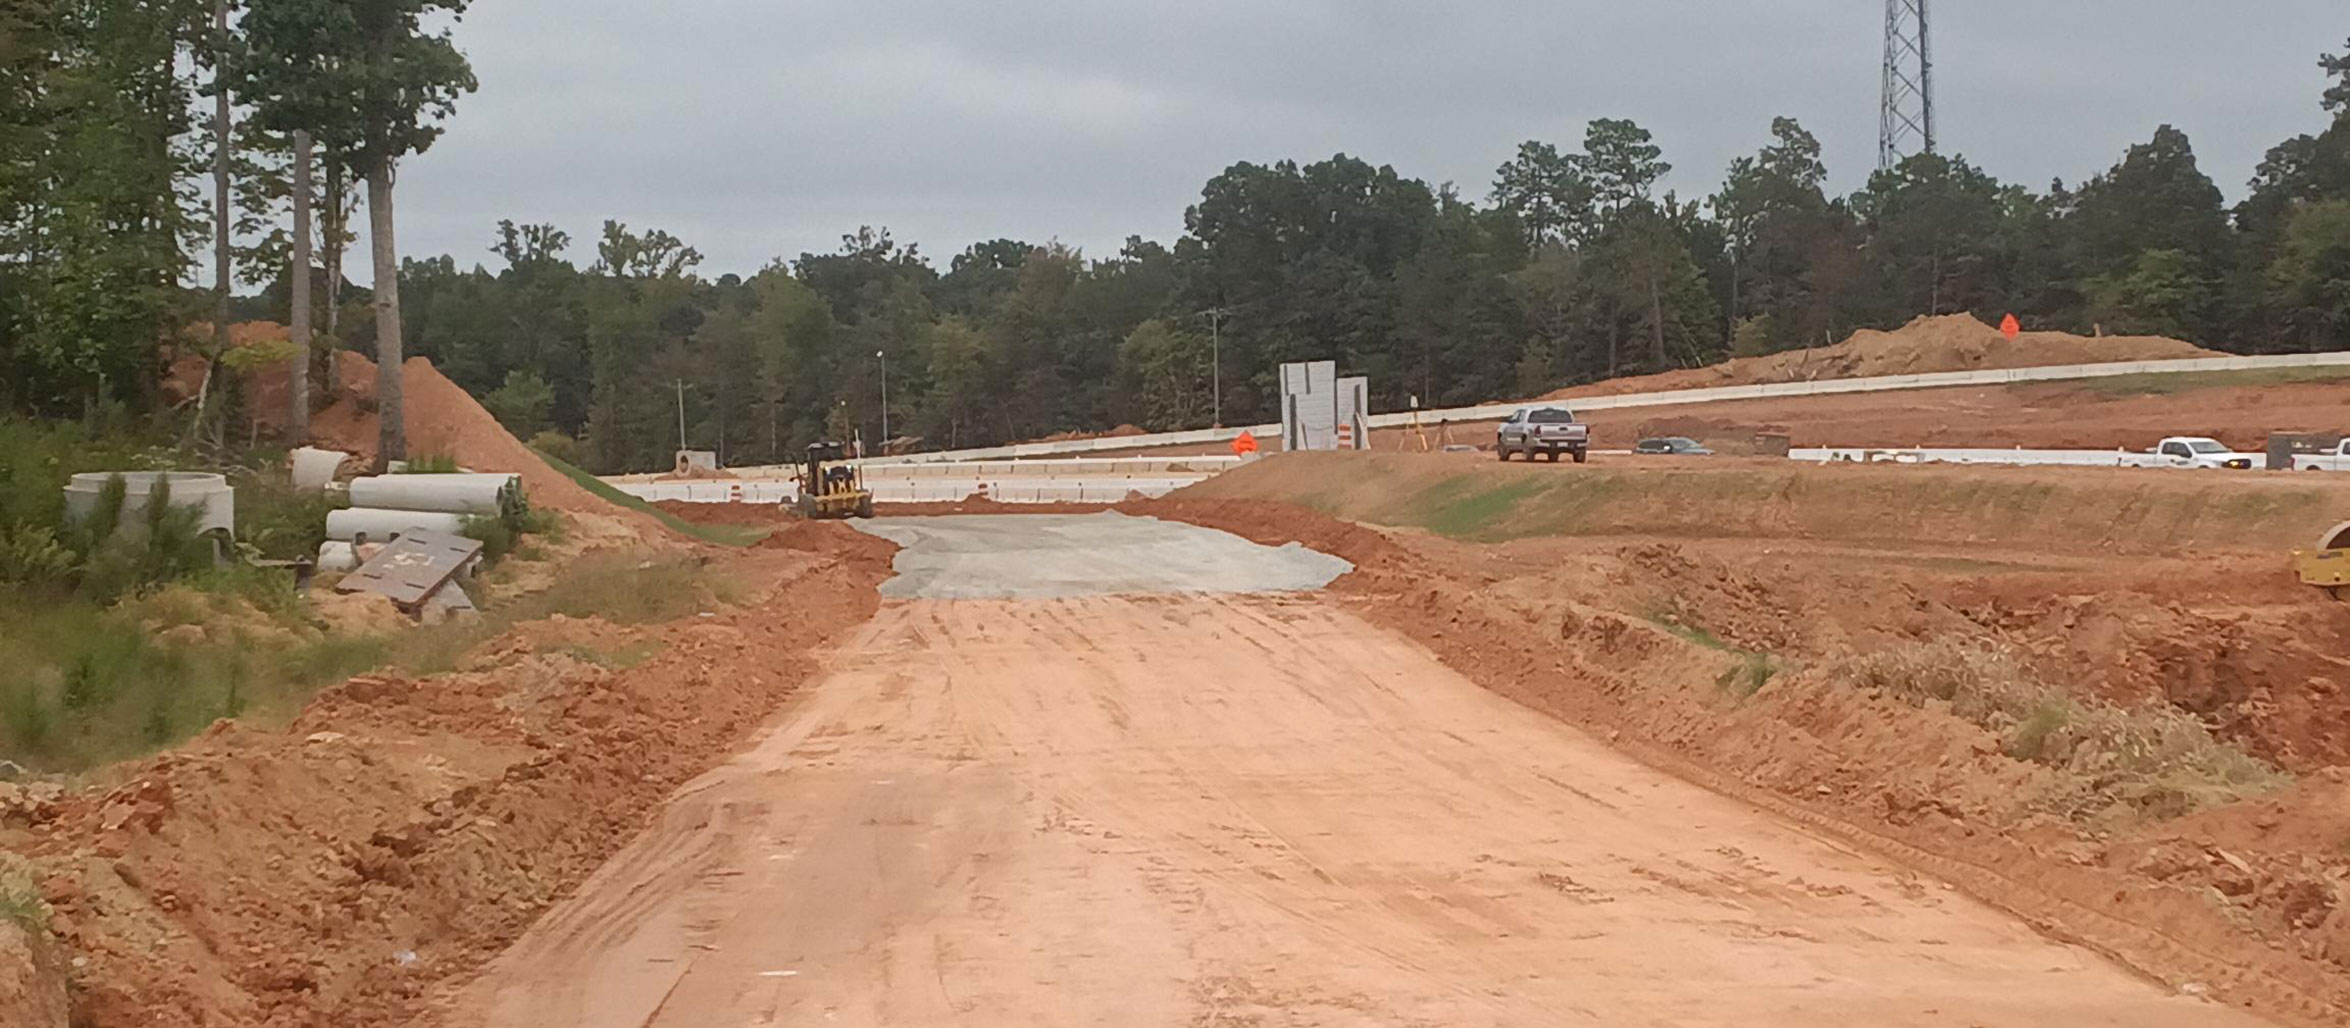 The construction of the new ramps for Exit 91 is underway.  After the soil is graded and compacted, a layer of macadam base stone is added as part of the pavement design. 